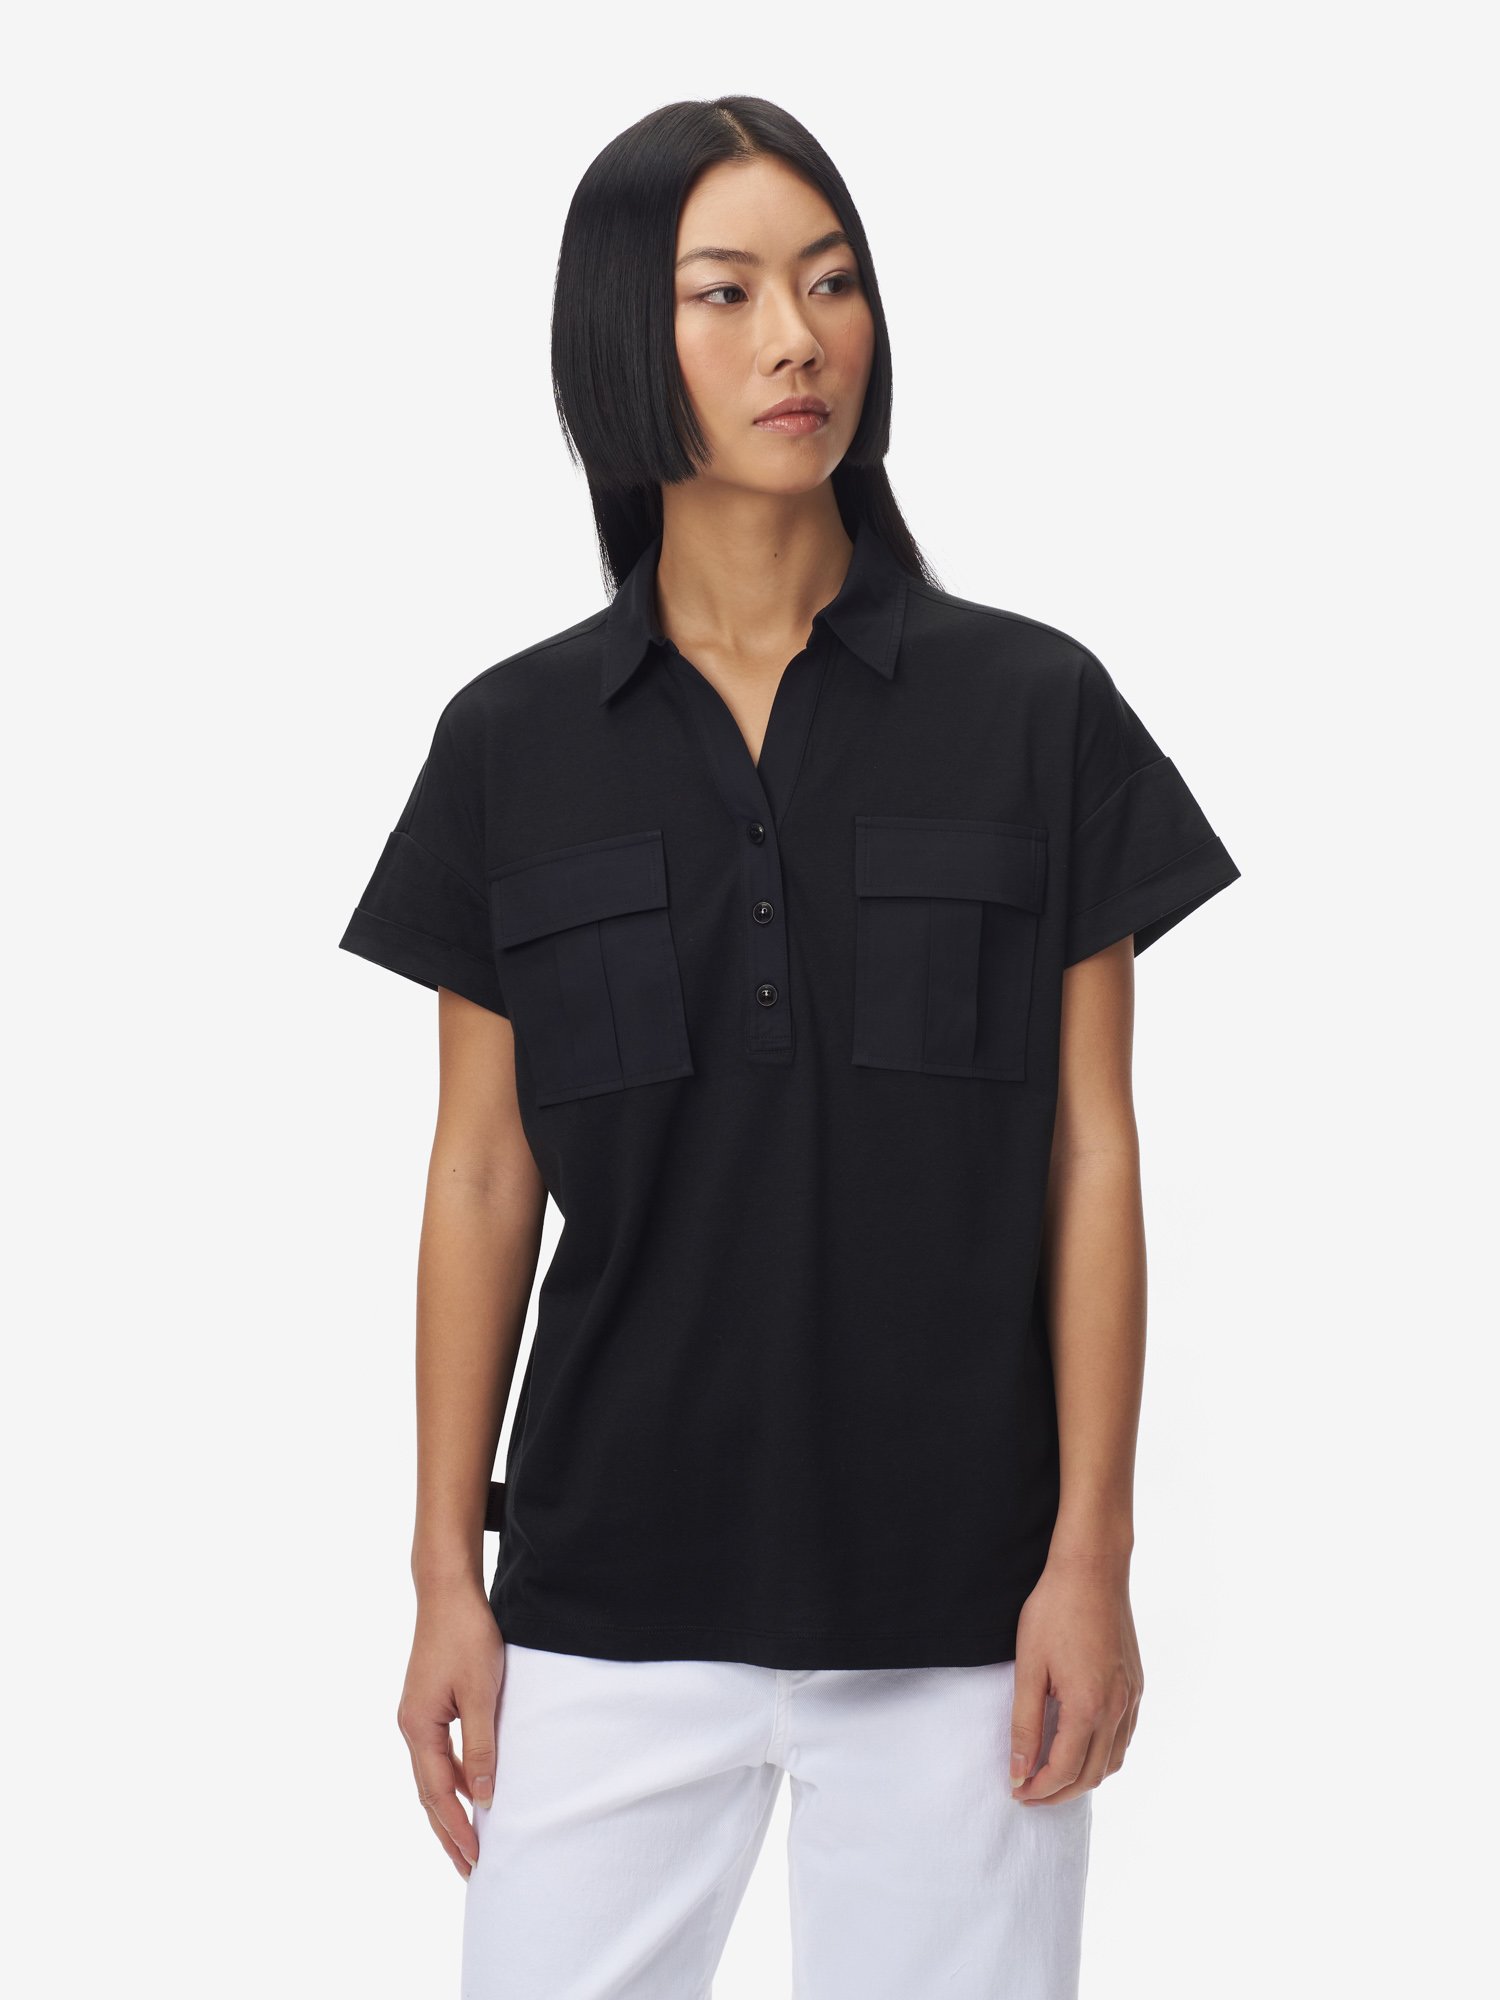 ® Pockets Shirt Womens Two Polo With | SALE\'s Blauer